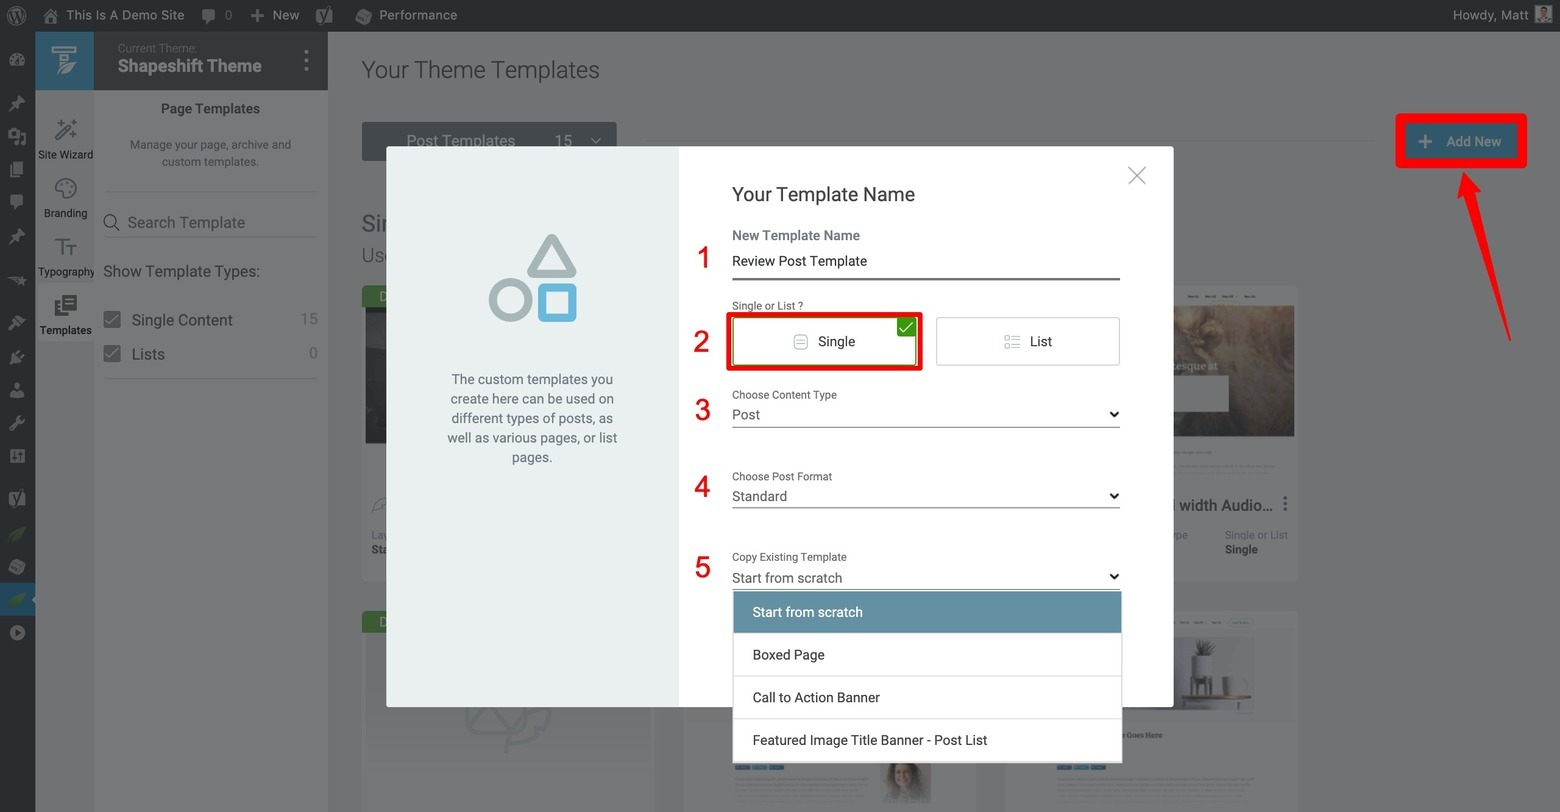 Use these initial setup steps to create a new Custom Post Template from scratch